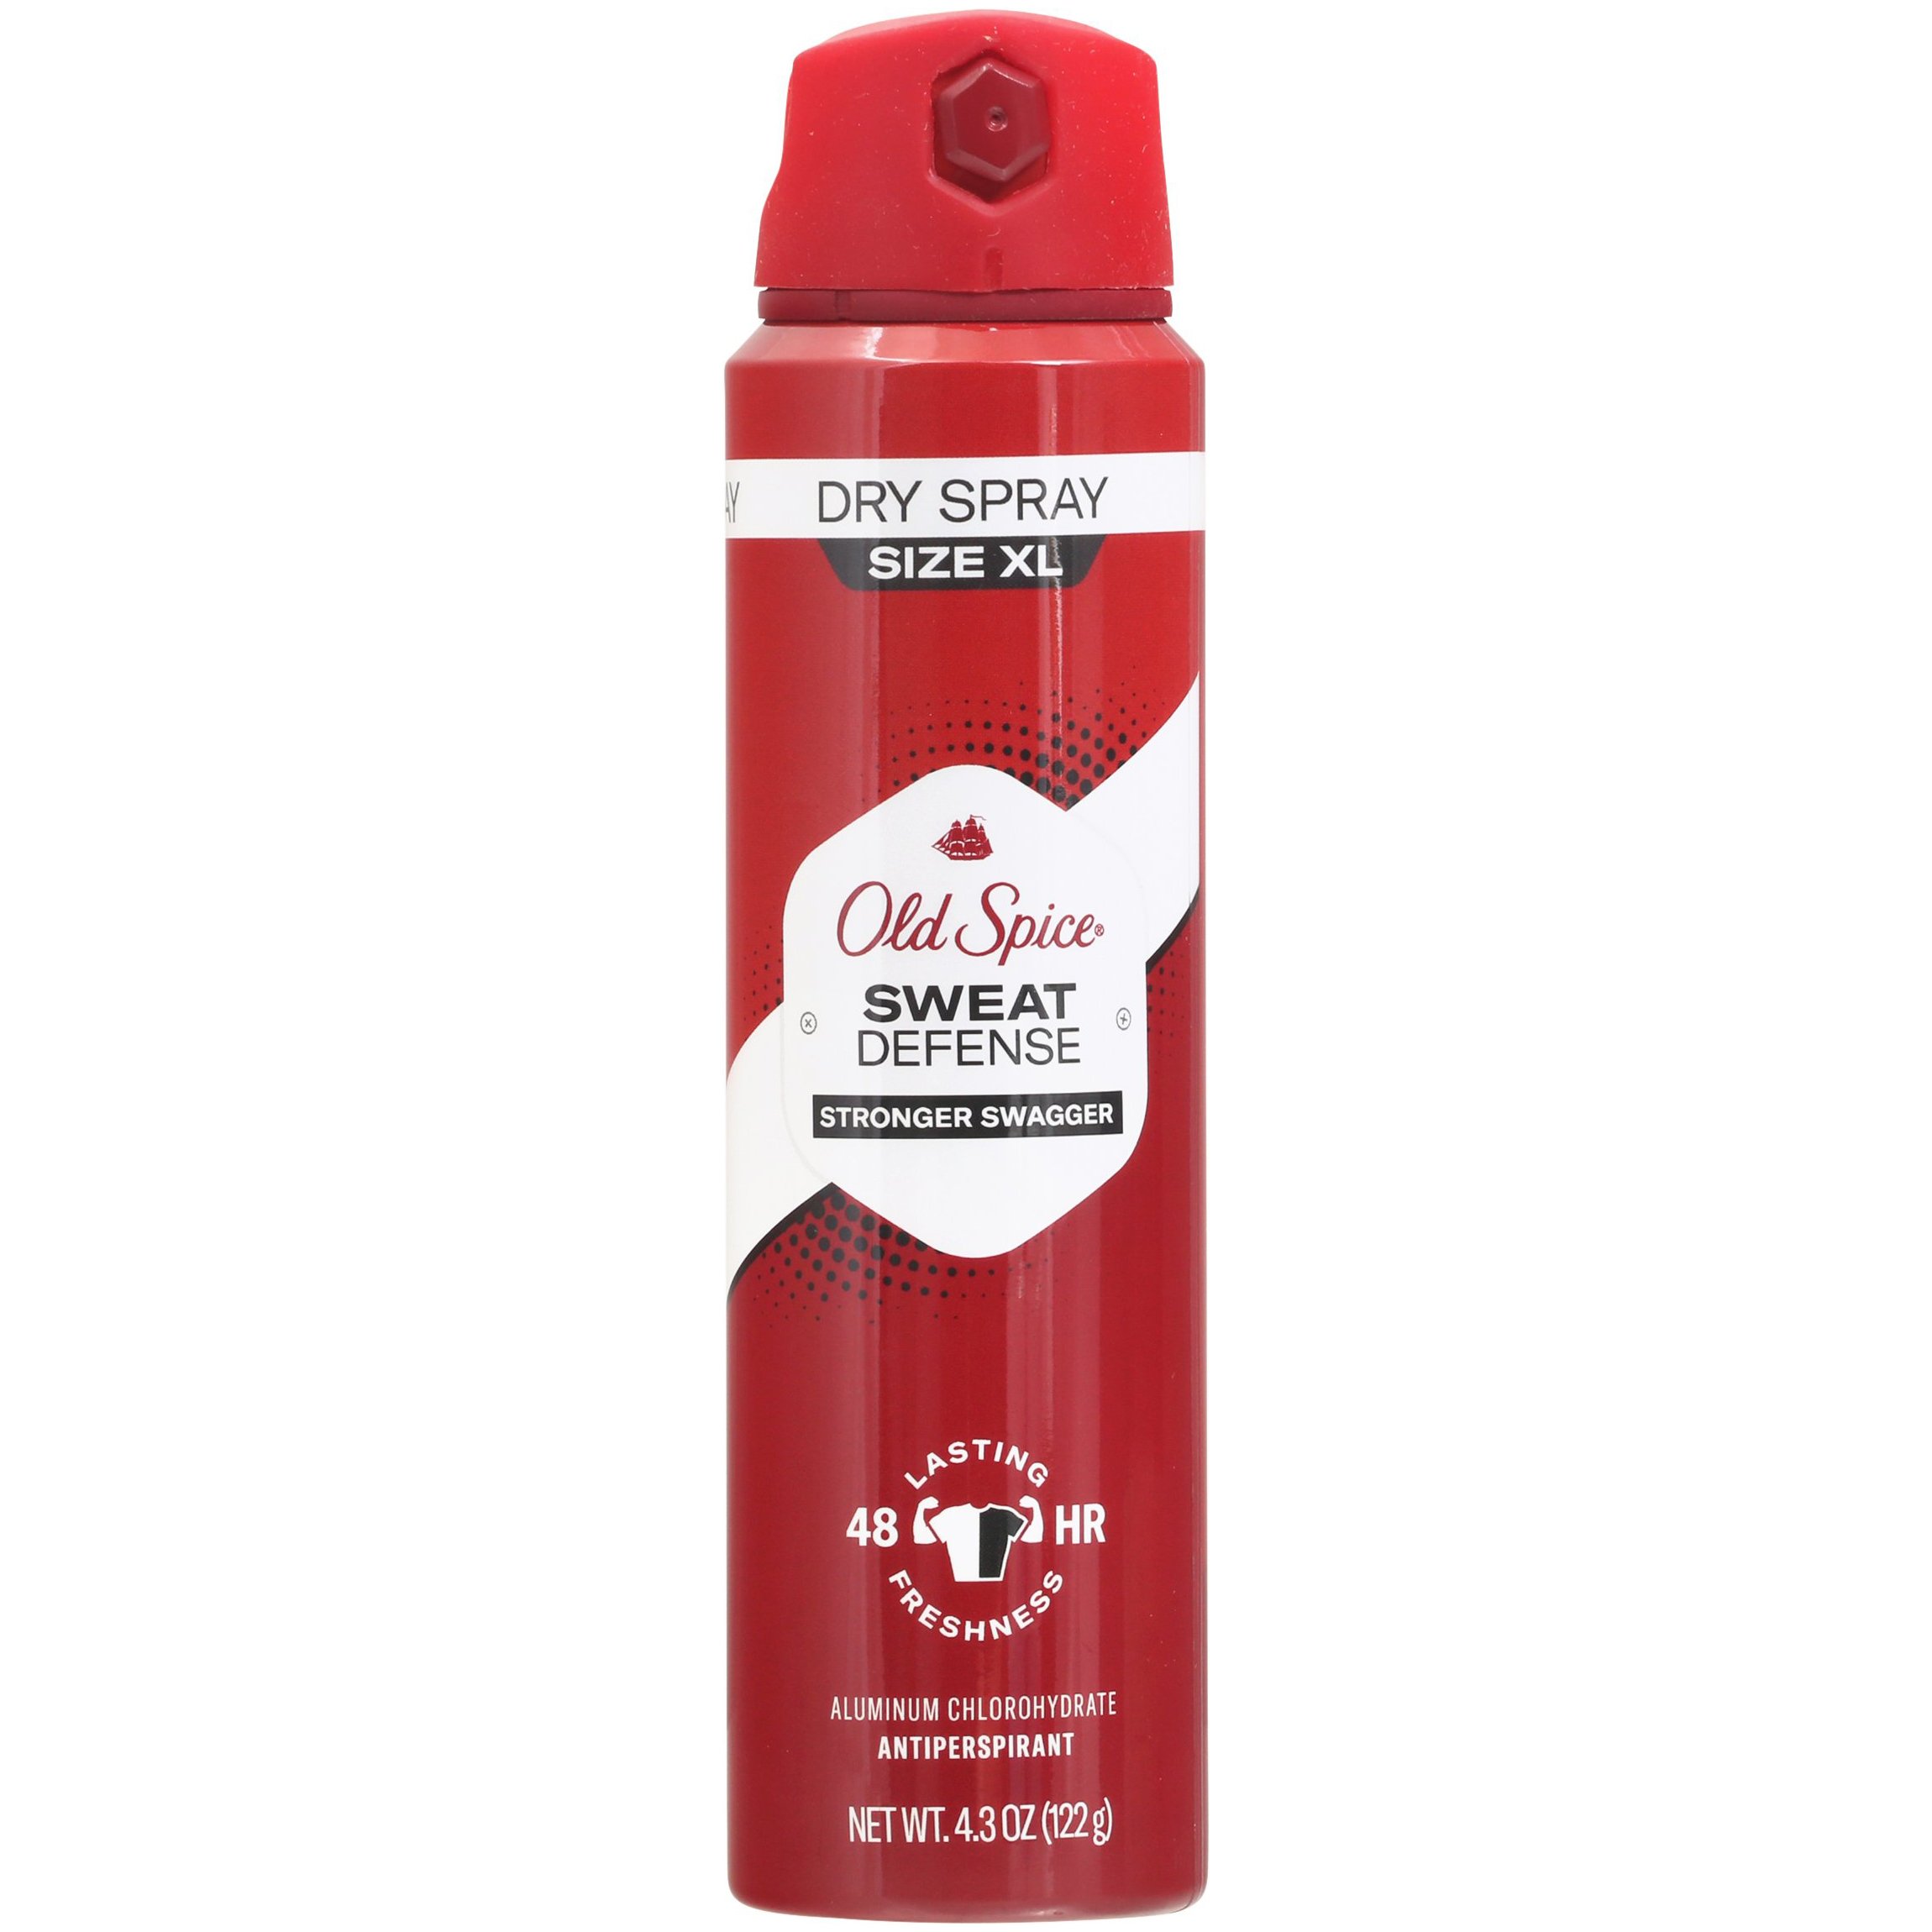 Old Spice Sweat Defense Antiperspirant Dry Spray Strong Swagger Shop Deodorant & Antiperspirant H-E-B